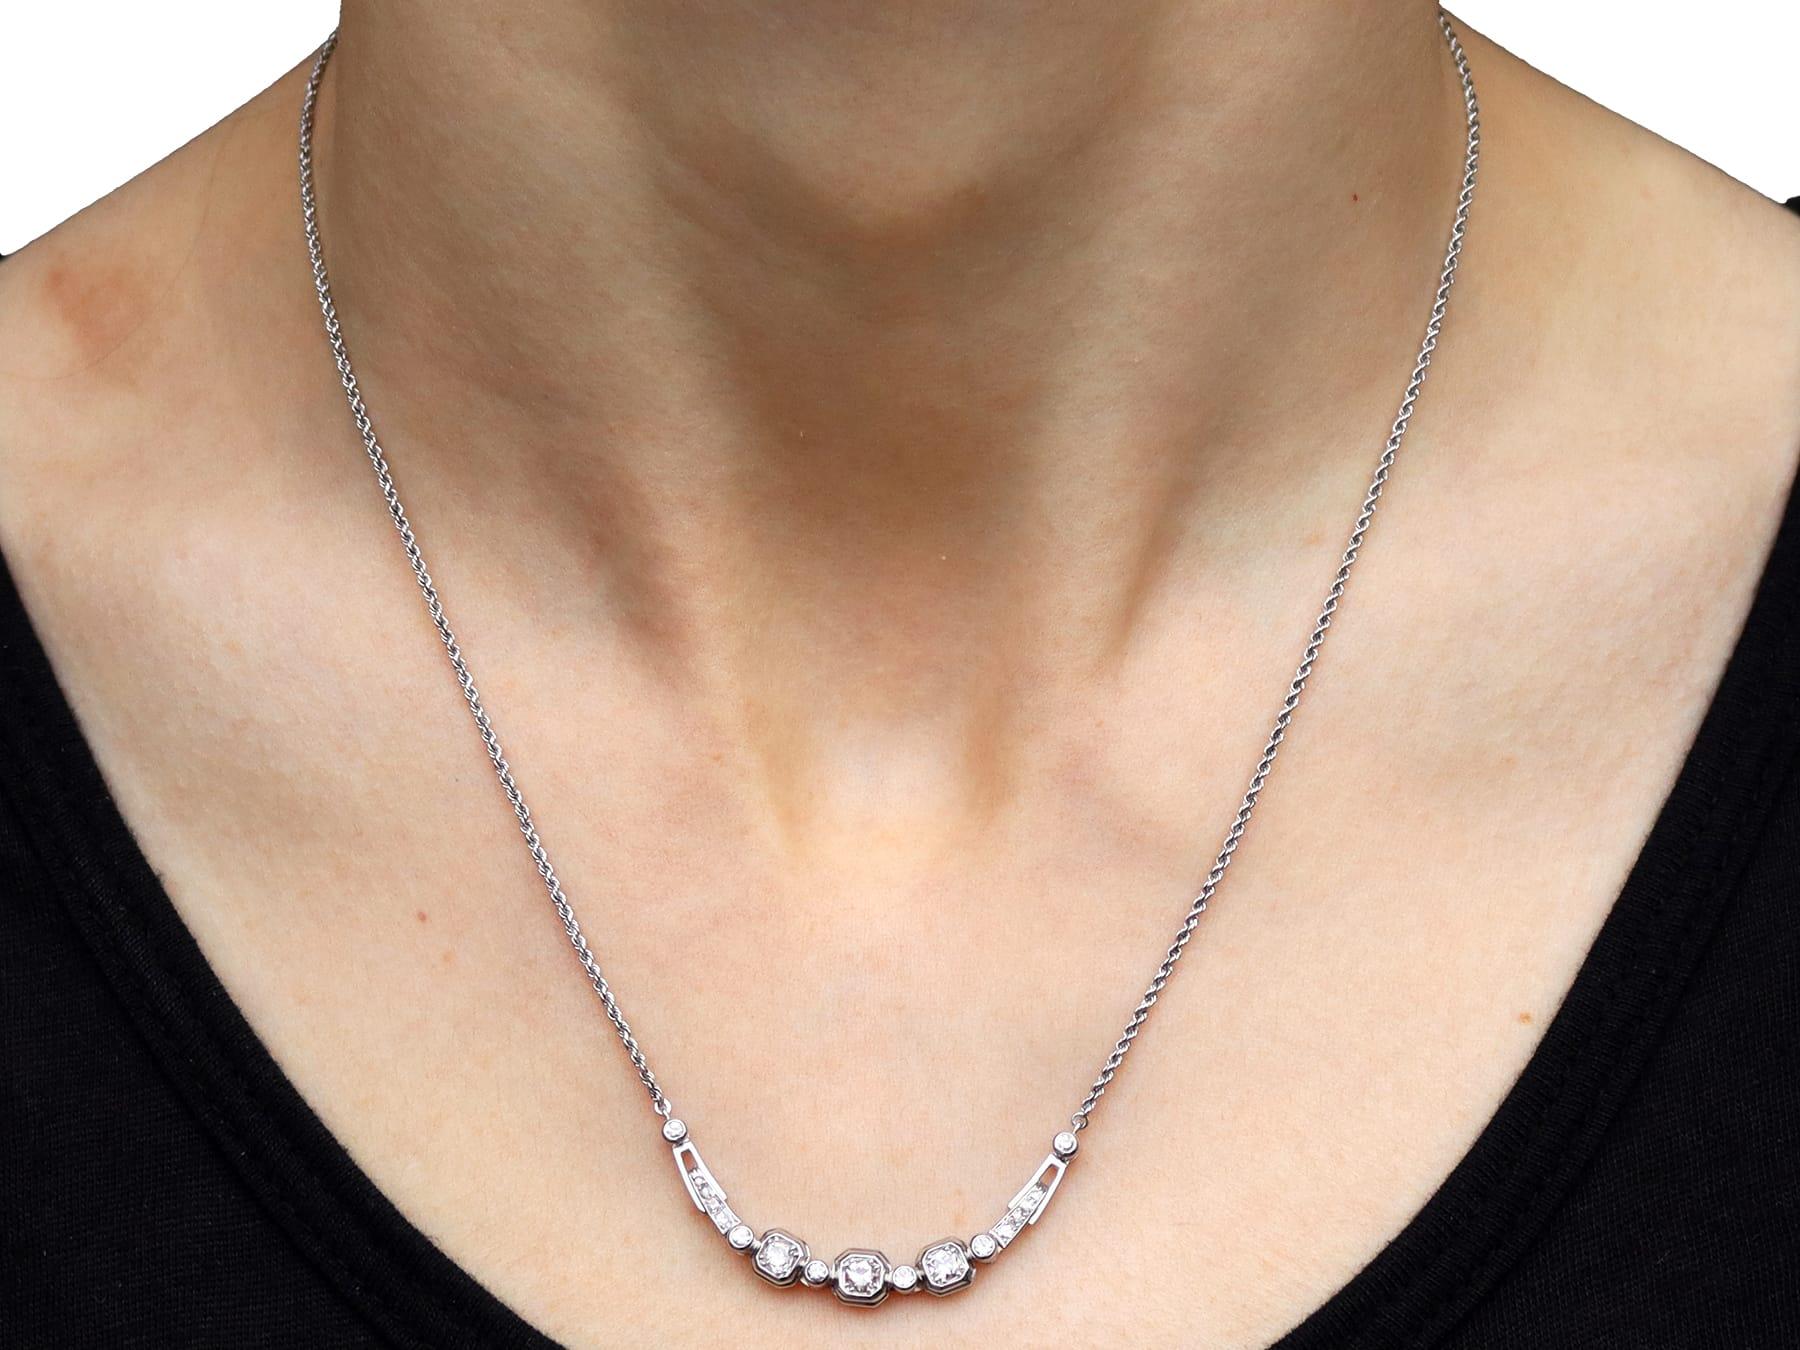 1920s 0.66 Carat Diamond and 18k White Gold Necklace For Sale 4